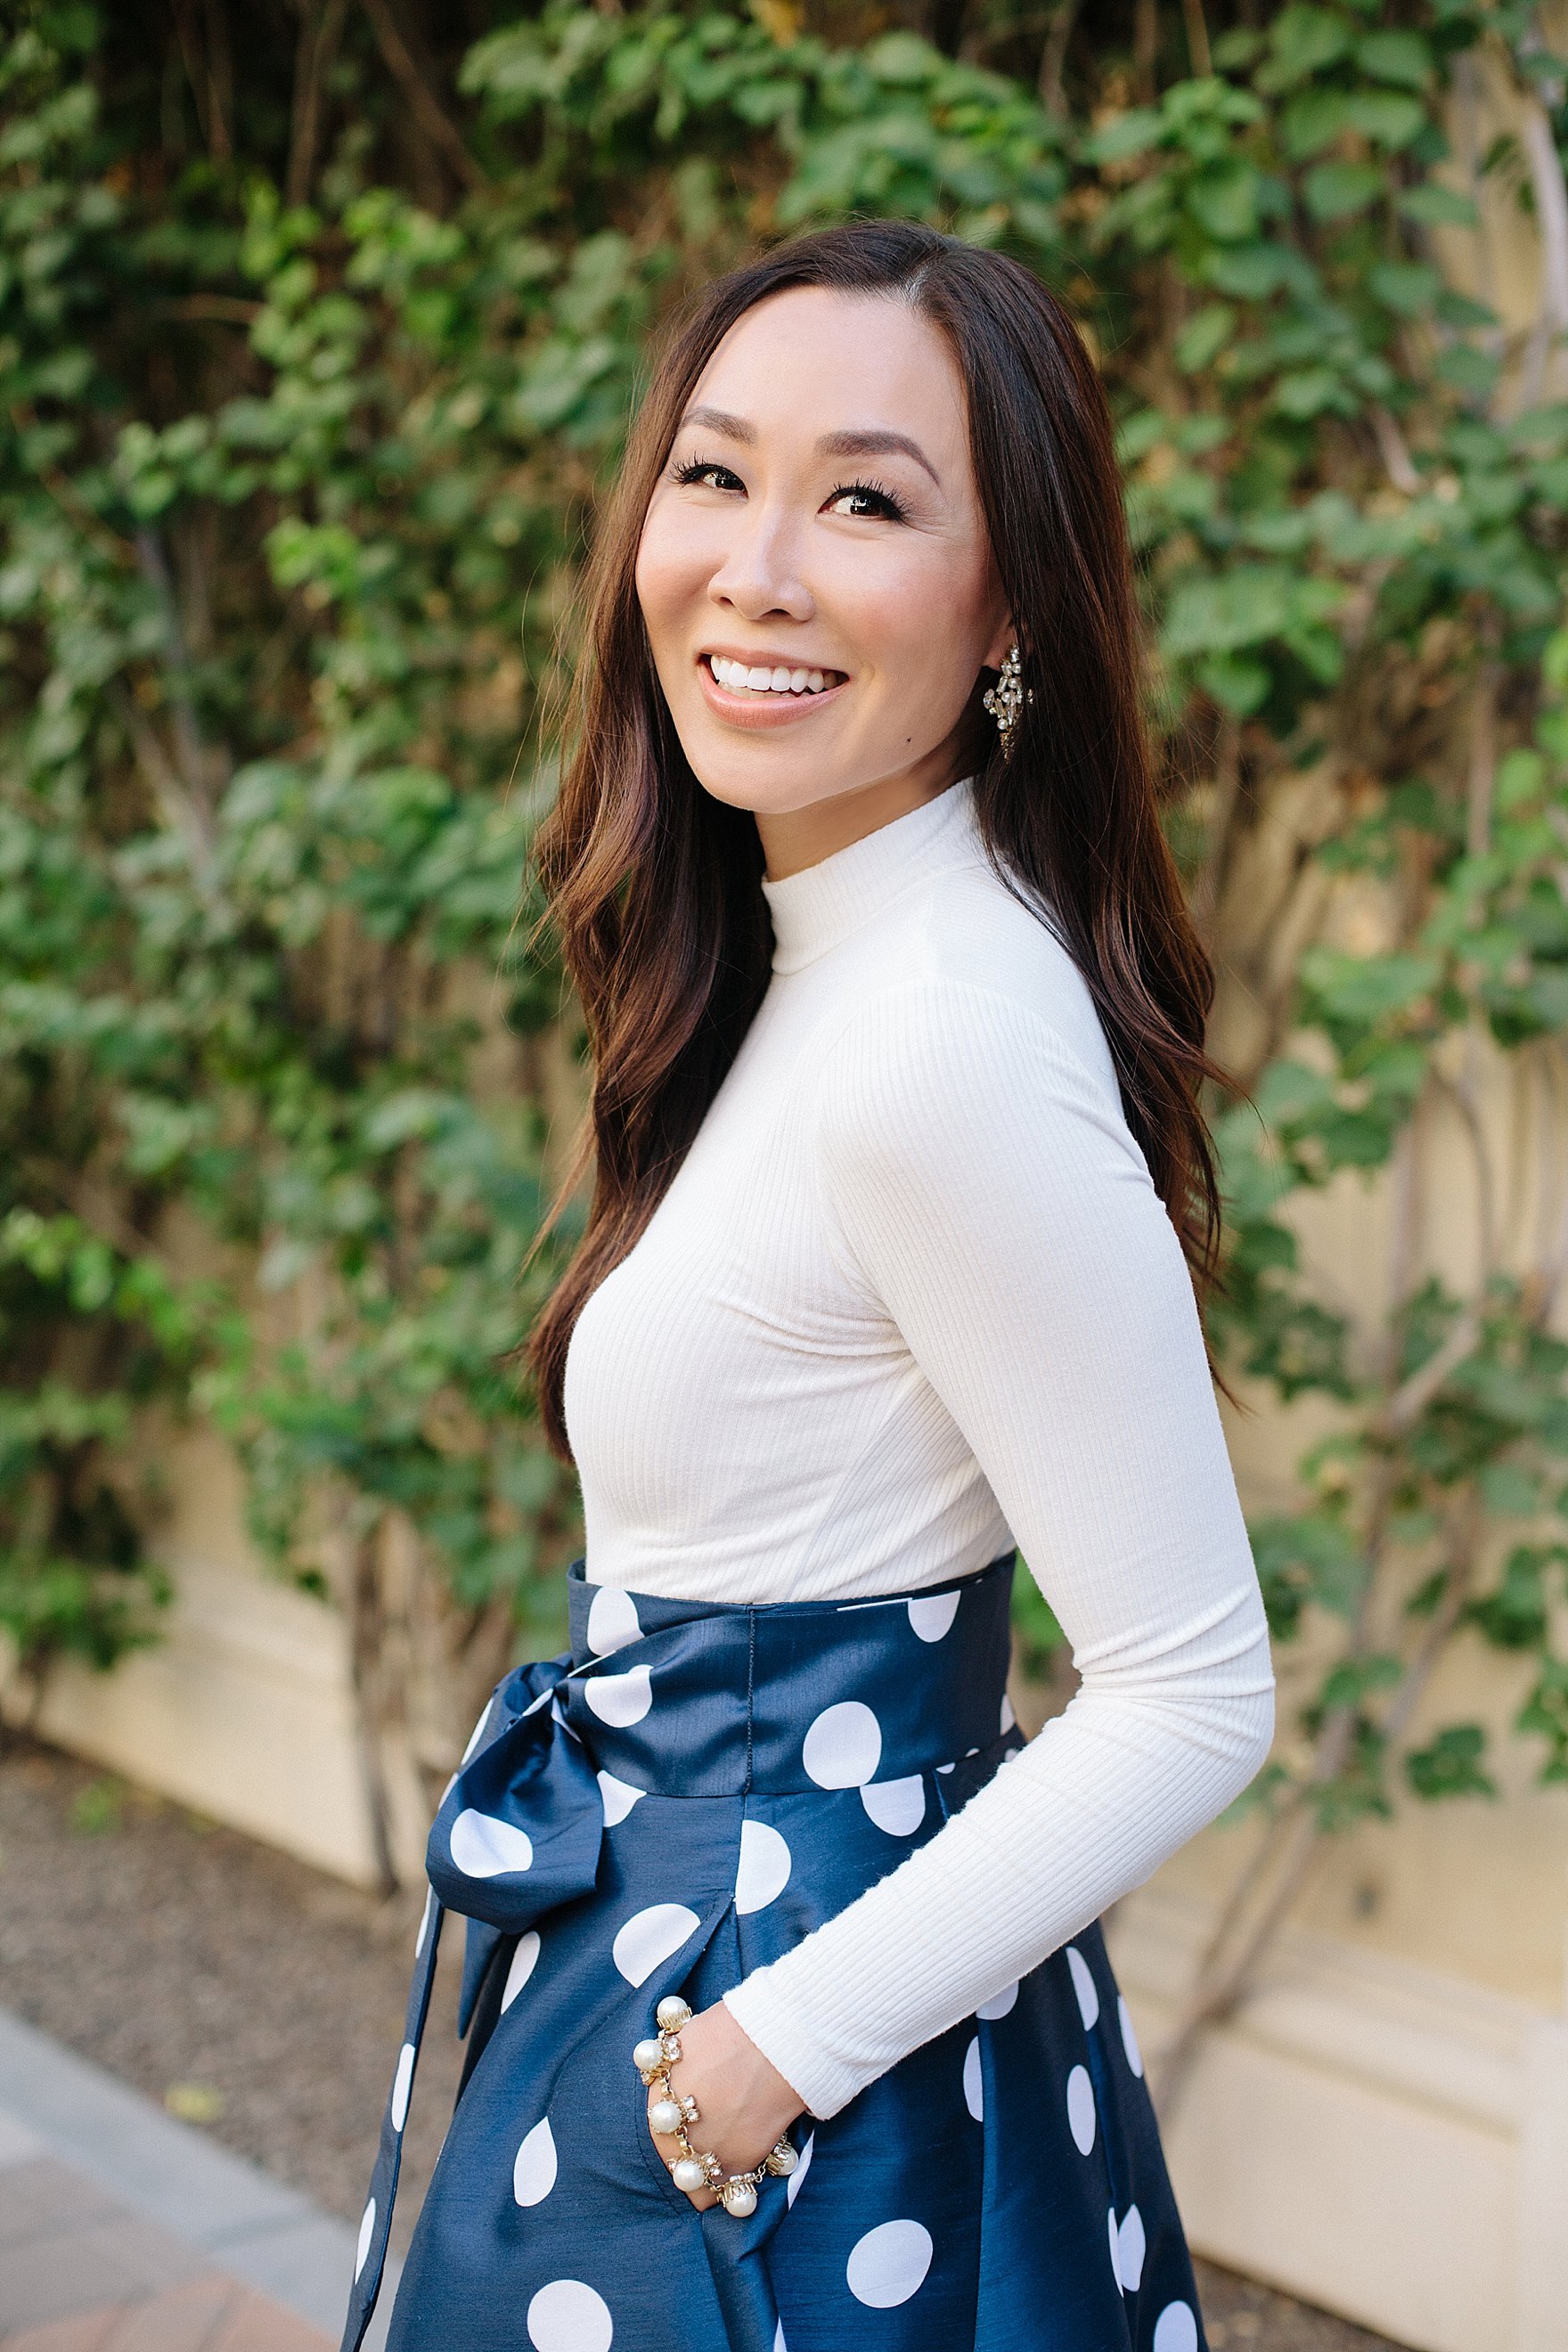 blue and white polka dot long skirt custom by eShakti with pockets! Great holiday dress outfit look on blogger Diana Elizabeth